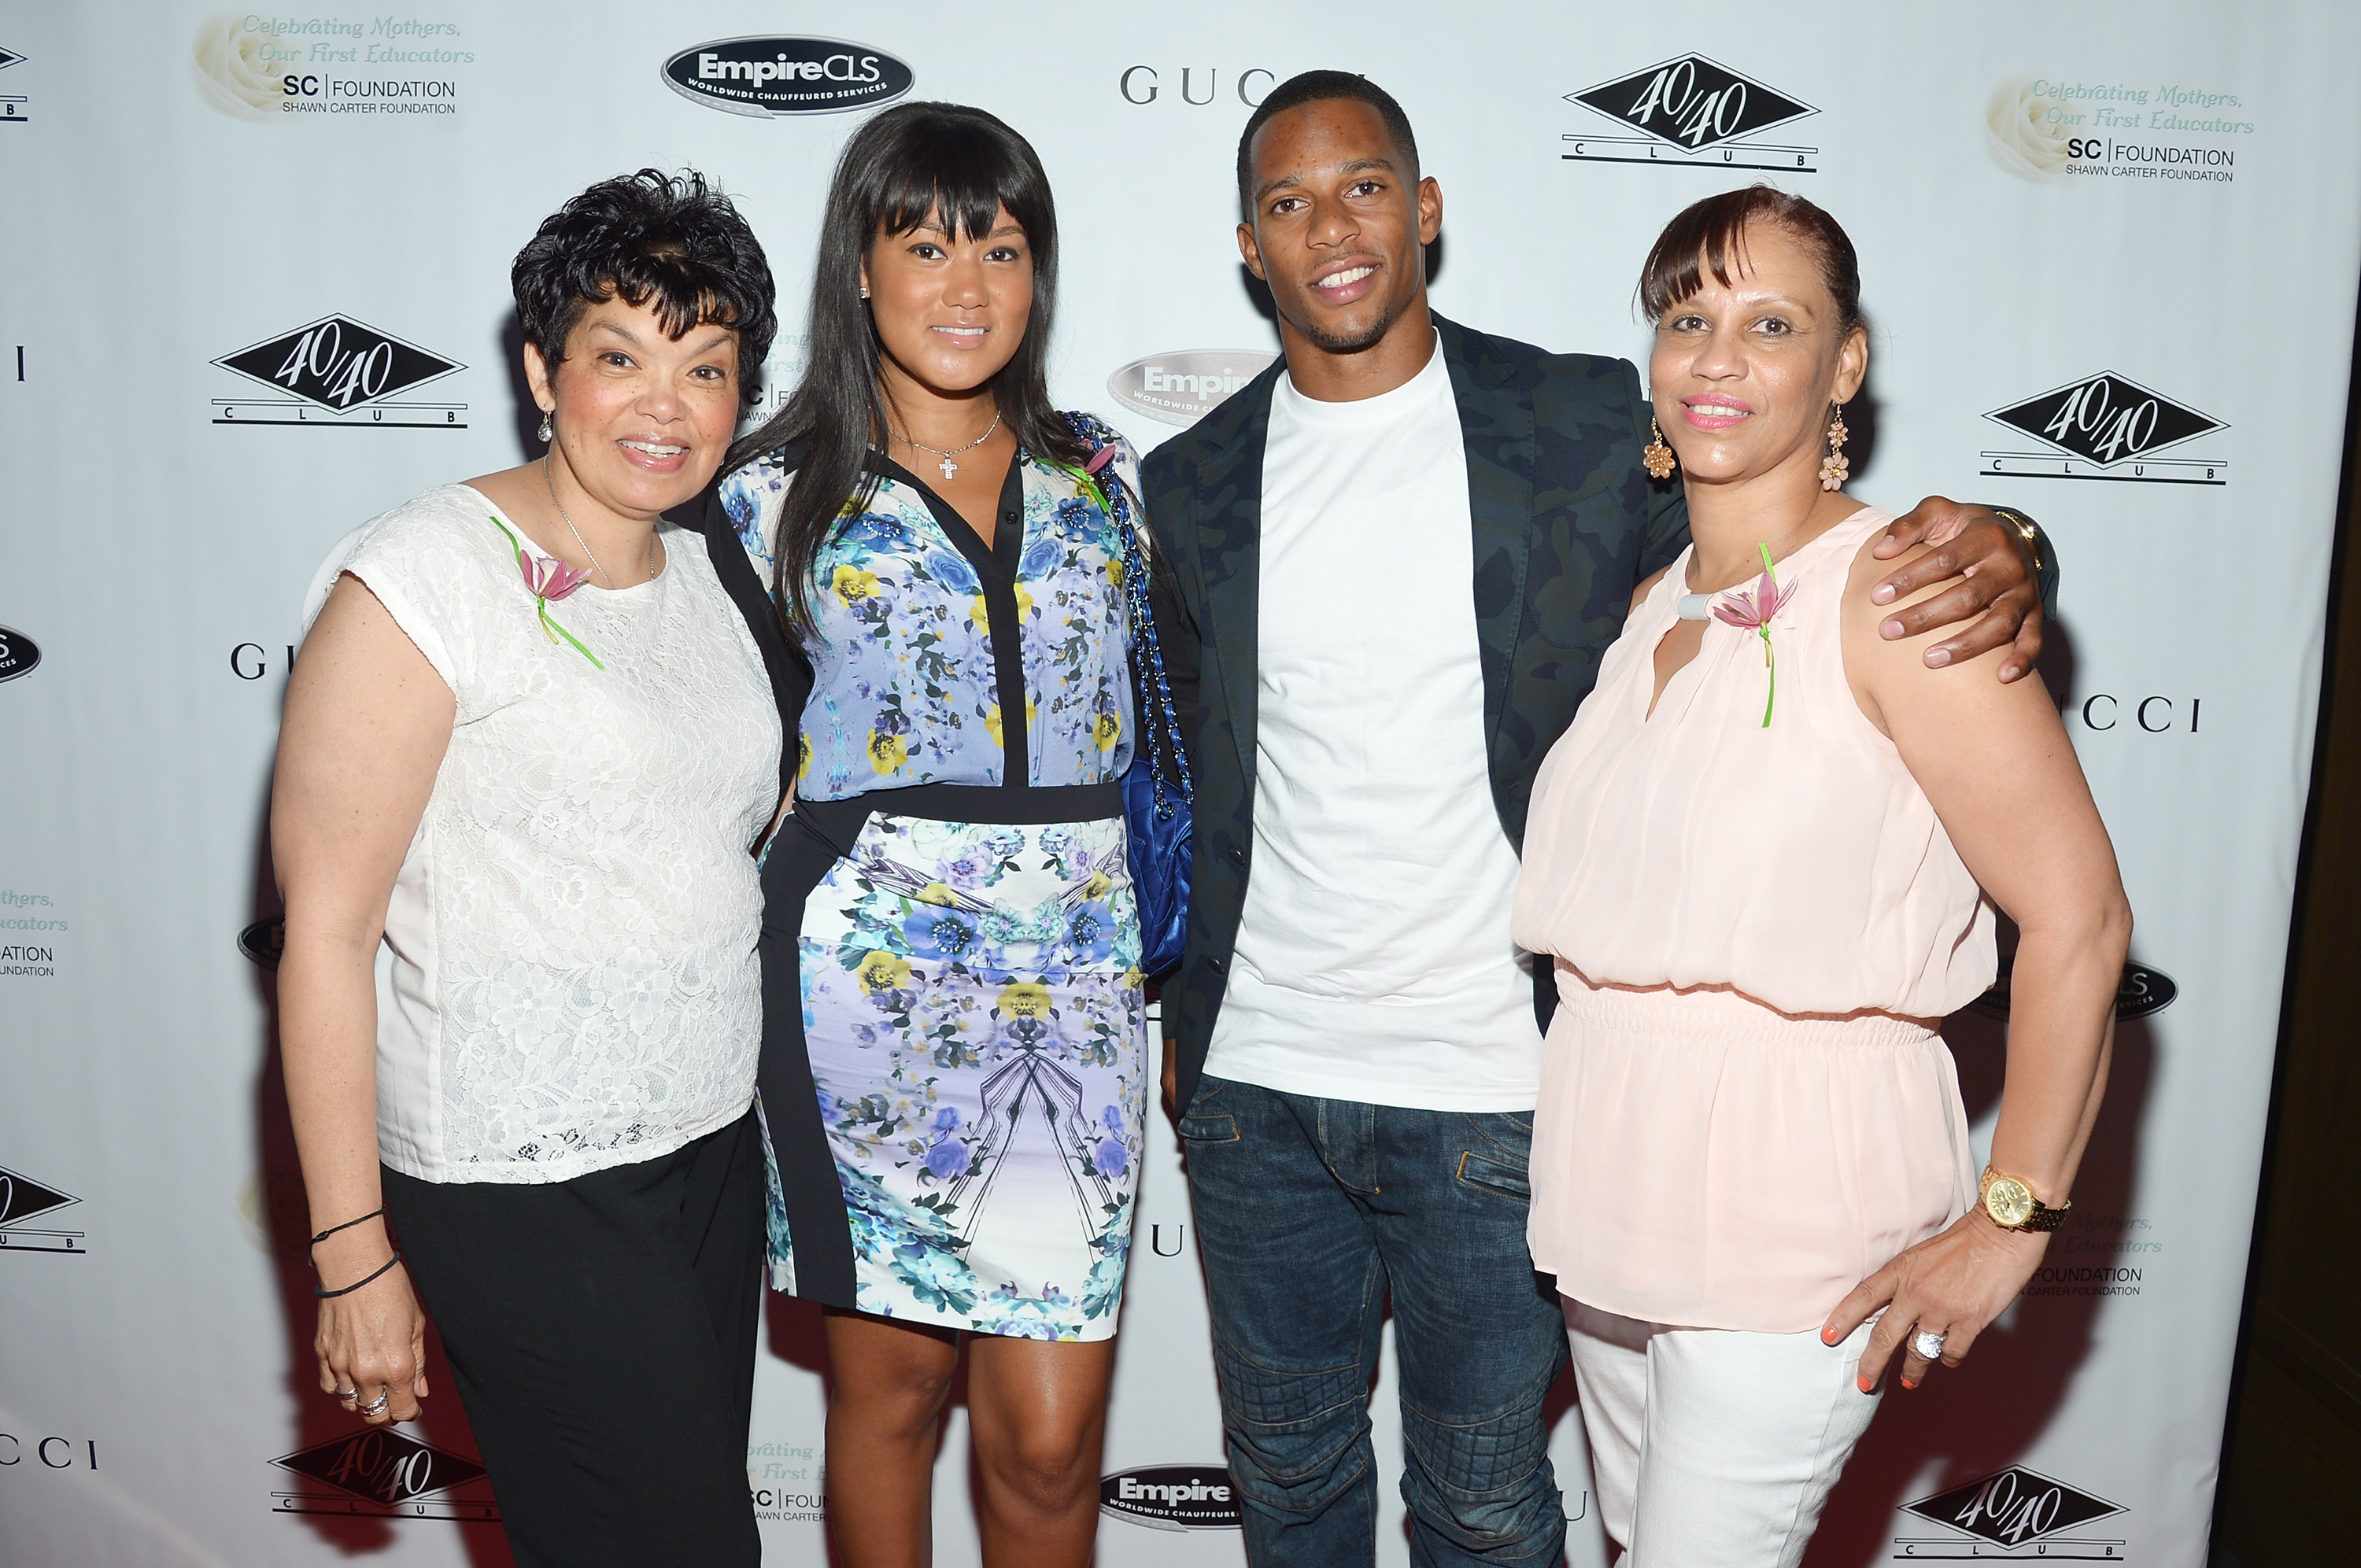 NEW YORK, NY - MAY 11:  (L-R) Karen Watley, Elaina Watley, professional football player Victor Cruz, and Blanca Cruz attend the Shawn Carter Foundation's Mother's Day event "Celebrating Mothers, Our First Educators" at 40 / 40 Club on May 11, 2013 in New York City.  (Photo by Mike Coppola/WireImage)